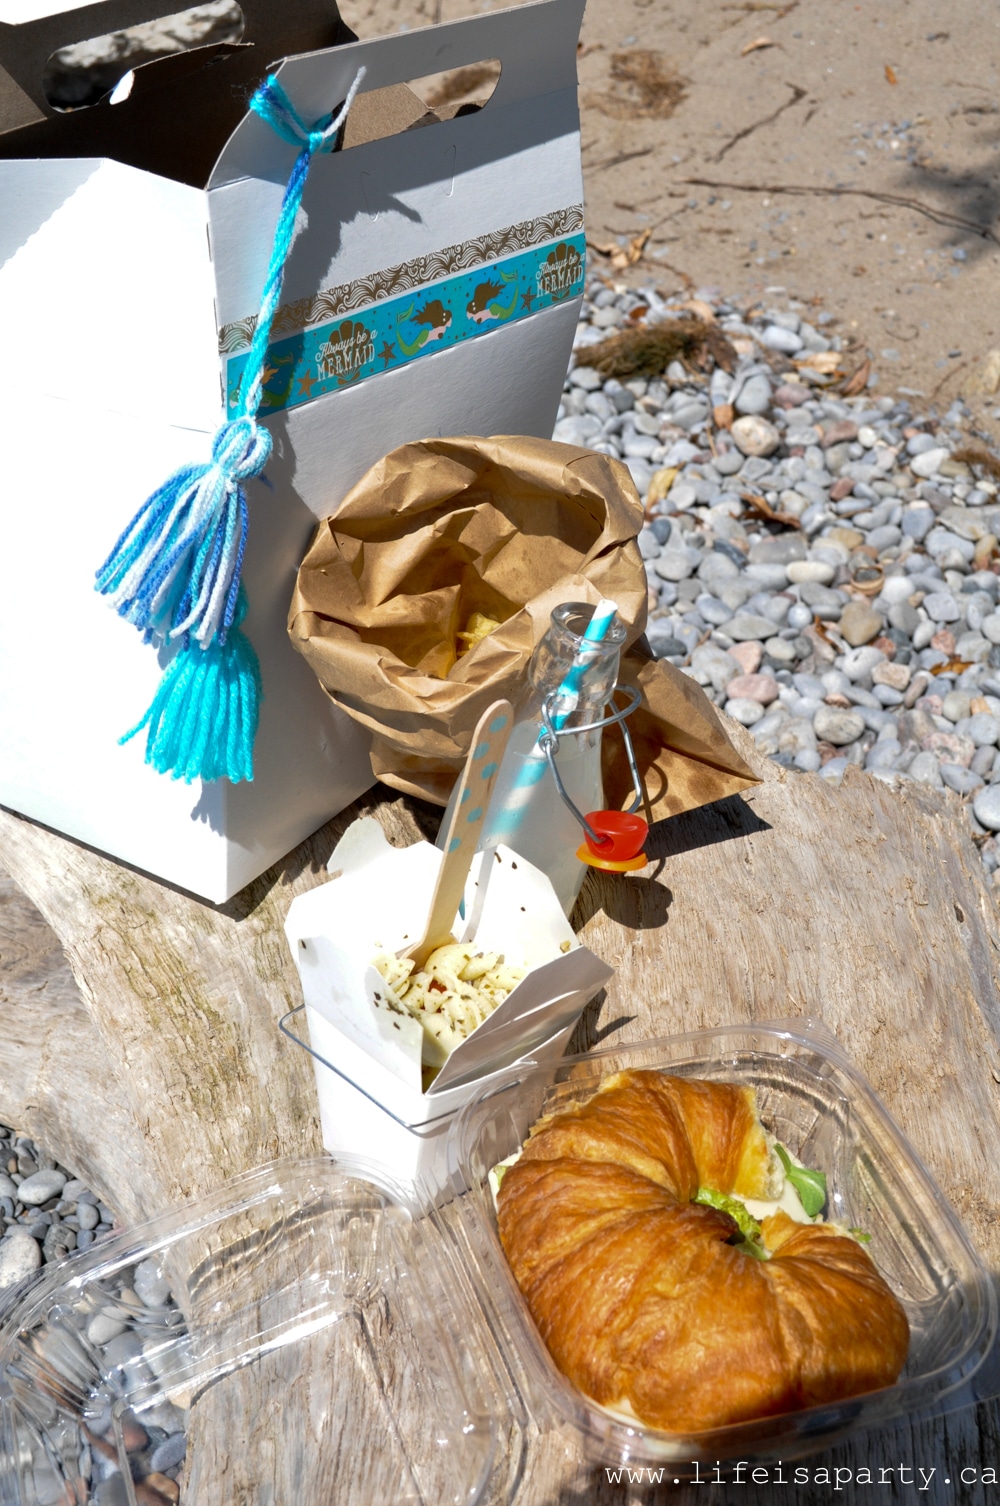 Mermaid Party Food: Inspiration for a Mermaid Beach Picnic, with a themed Mermaid Dessert Table full of mermaid treats like eatable driftwood, pearls, treasure, and coral.